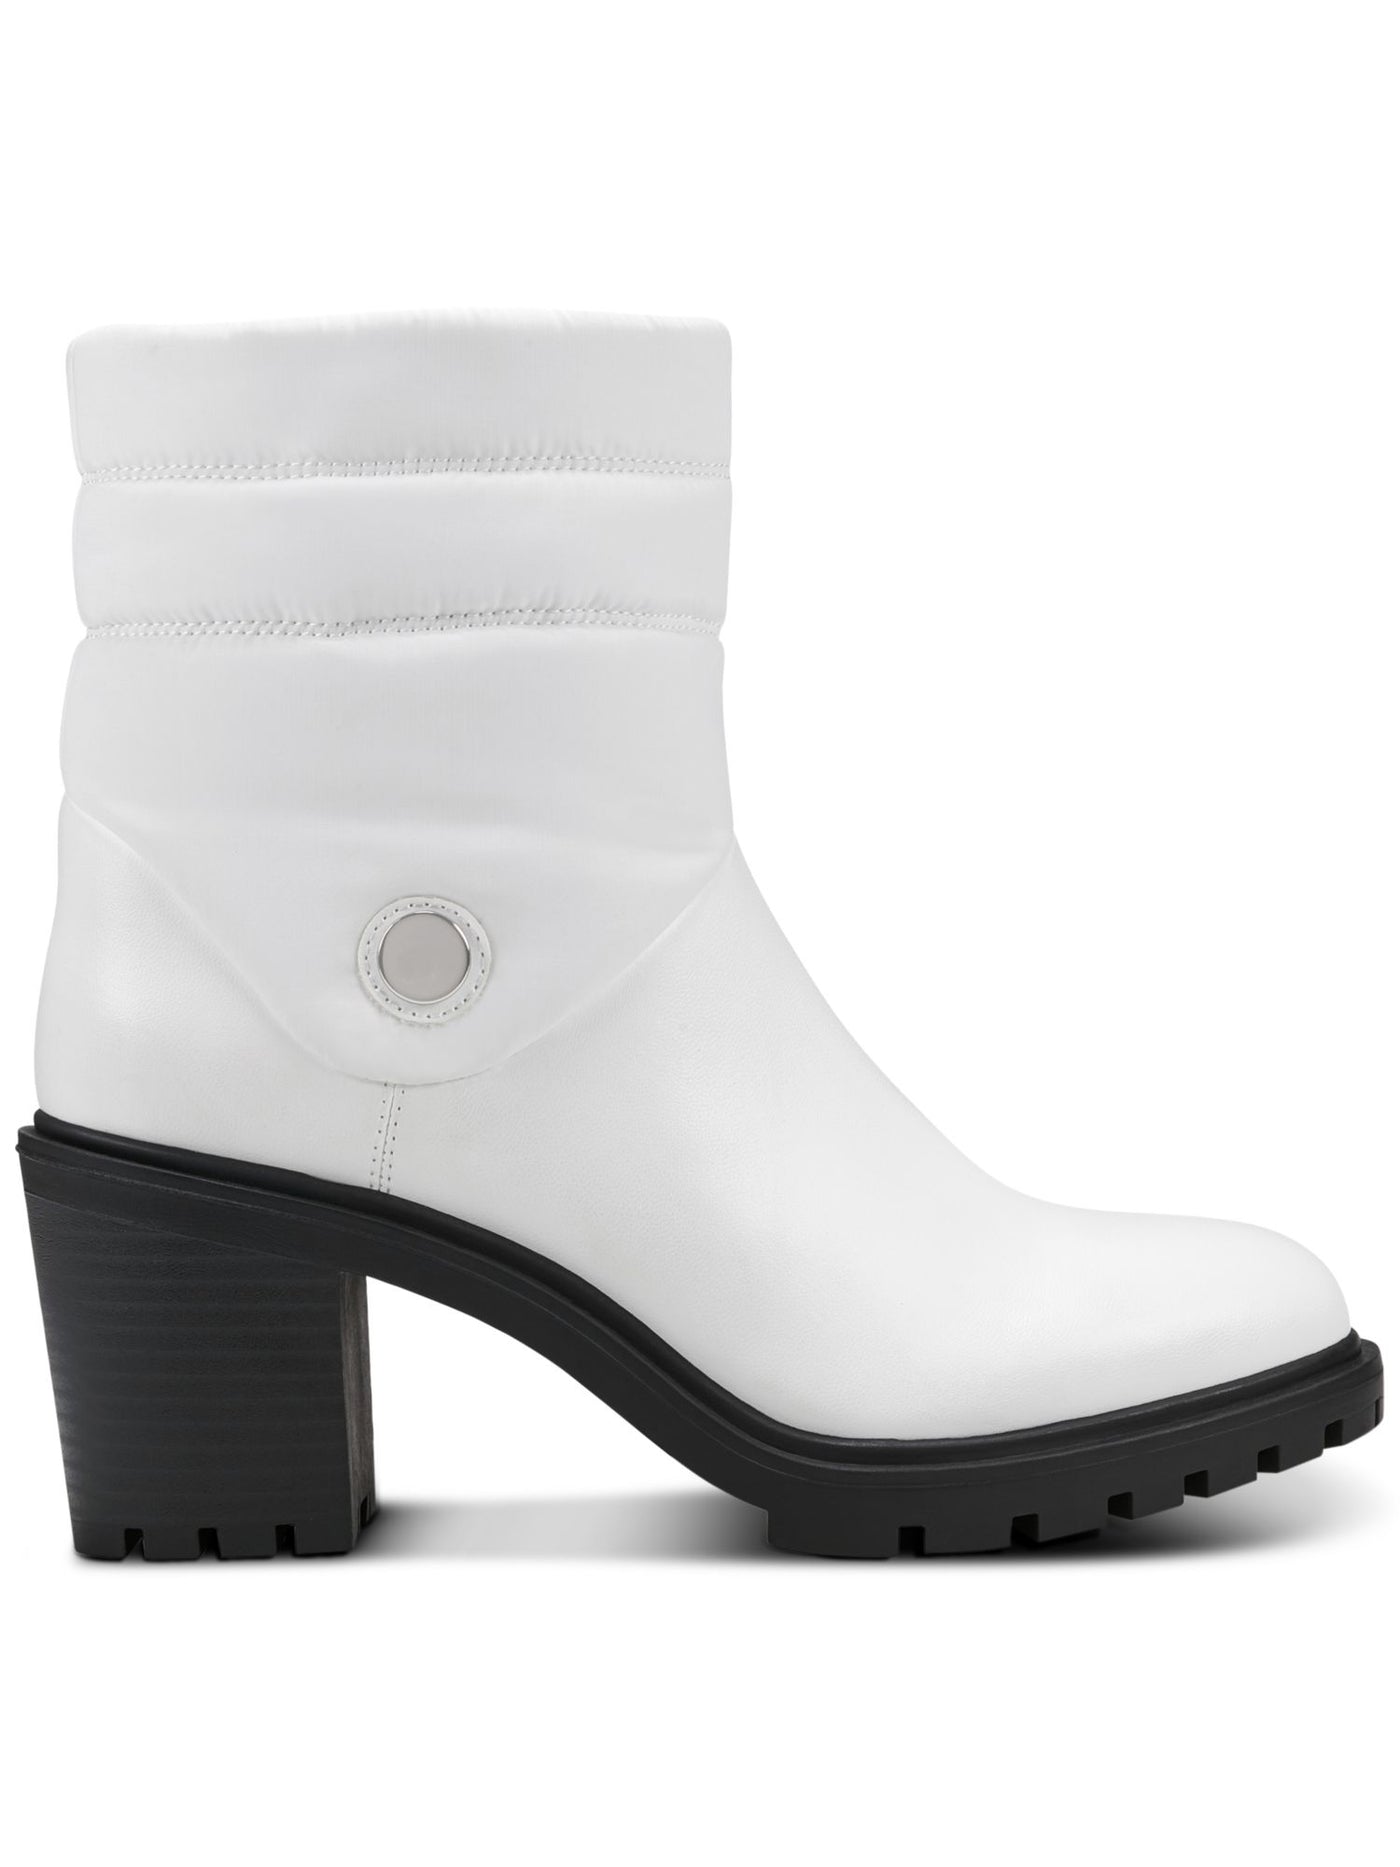 ALFANI Womens White Mixed Media Puffer Quilted Detailing Lug Sole Padded Belcalise Almond Toe Block Heel Zip-Up Booties 7 M